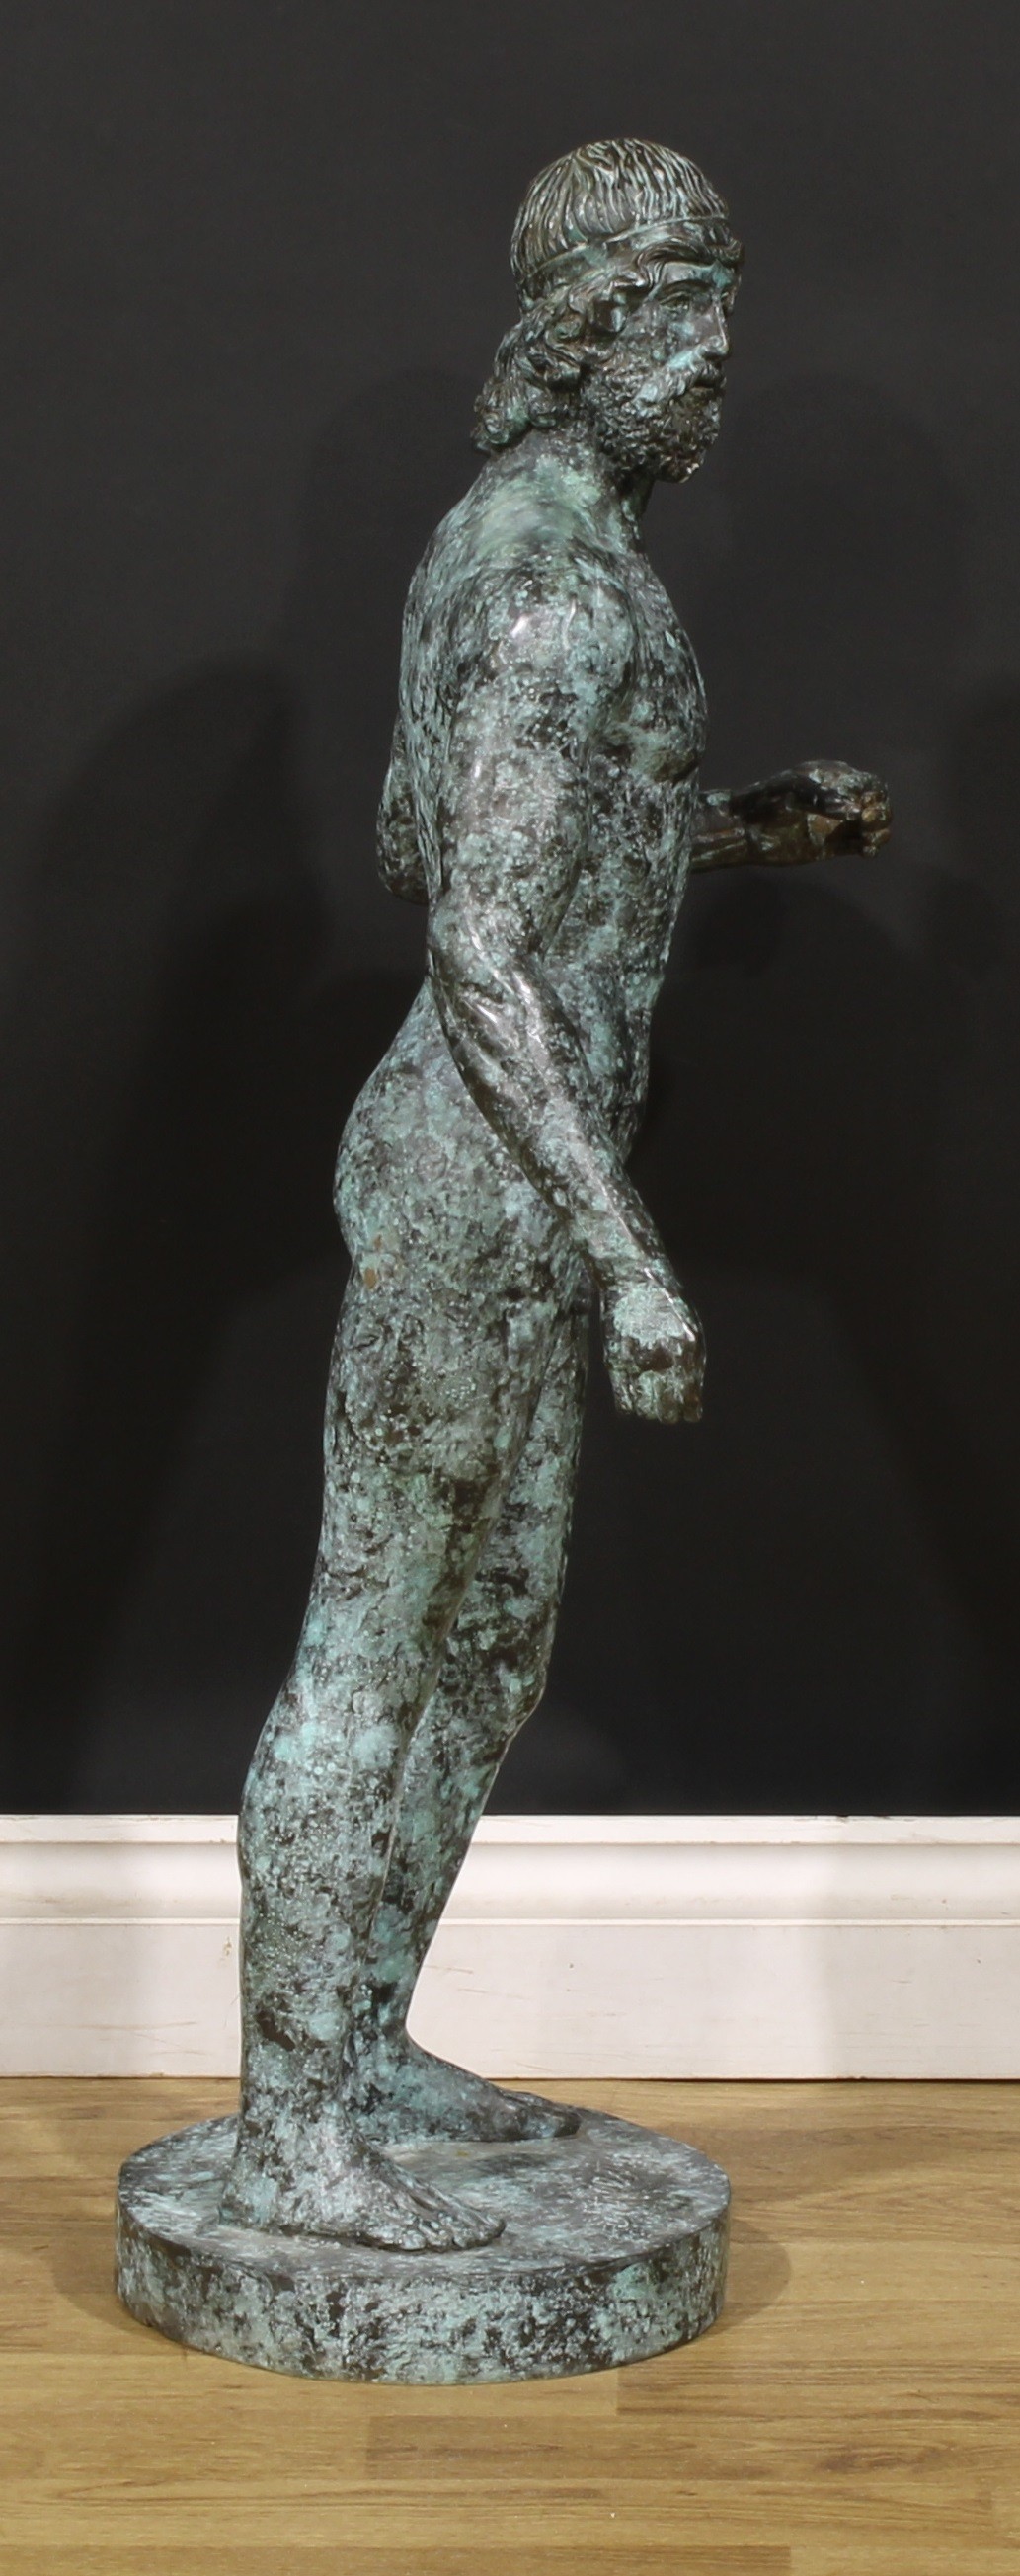 After the antique, a large verdigris patinated bronze figure, Warrior of Riace, signed J Tallsten, - Image 2 of 5